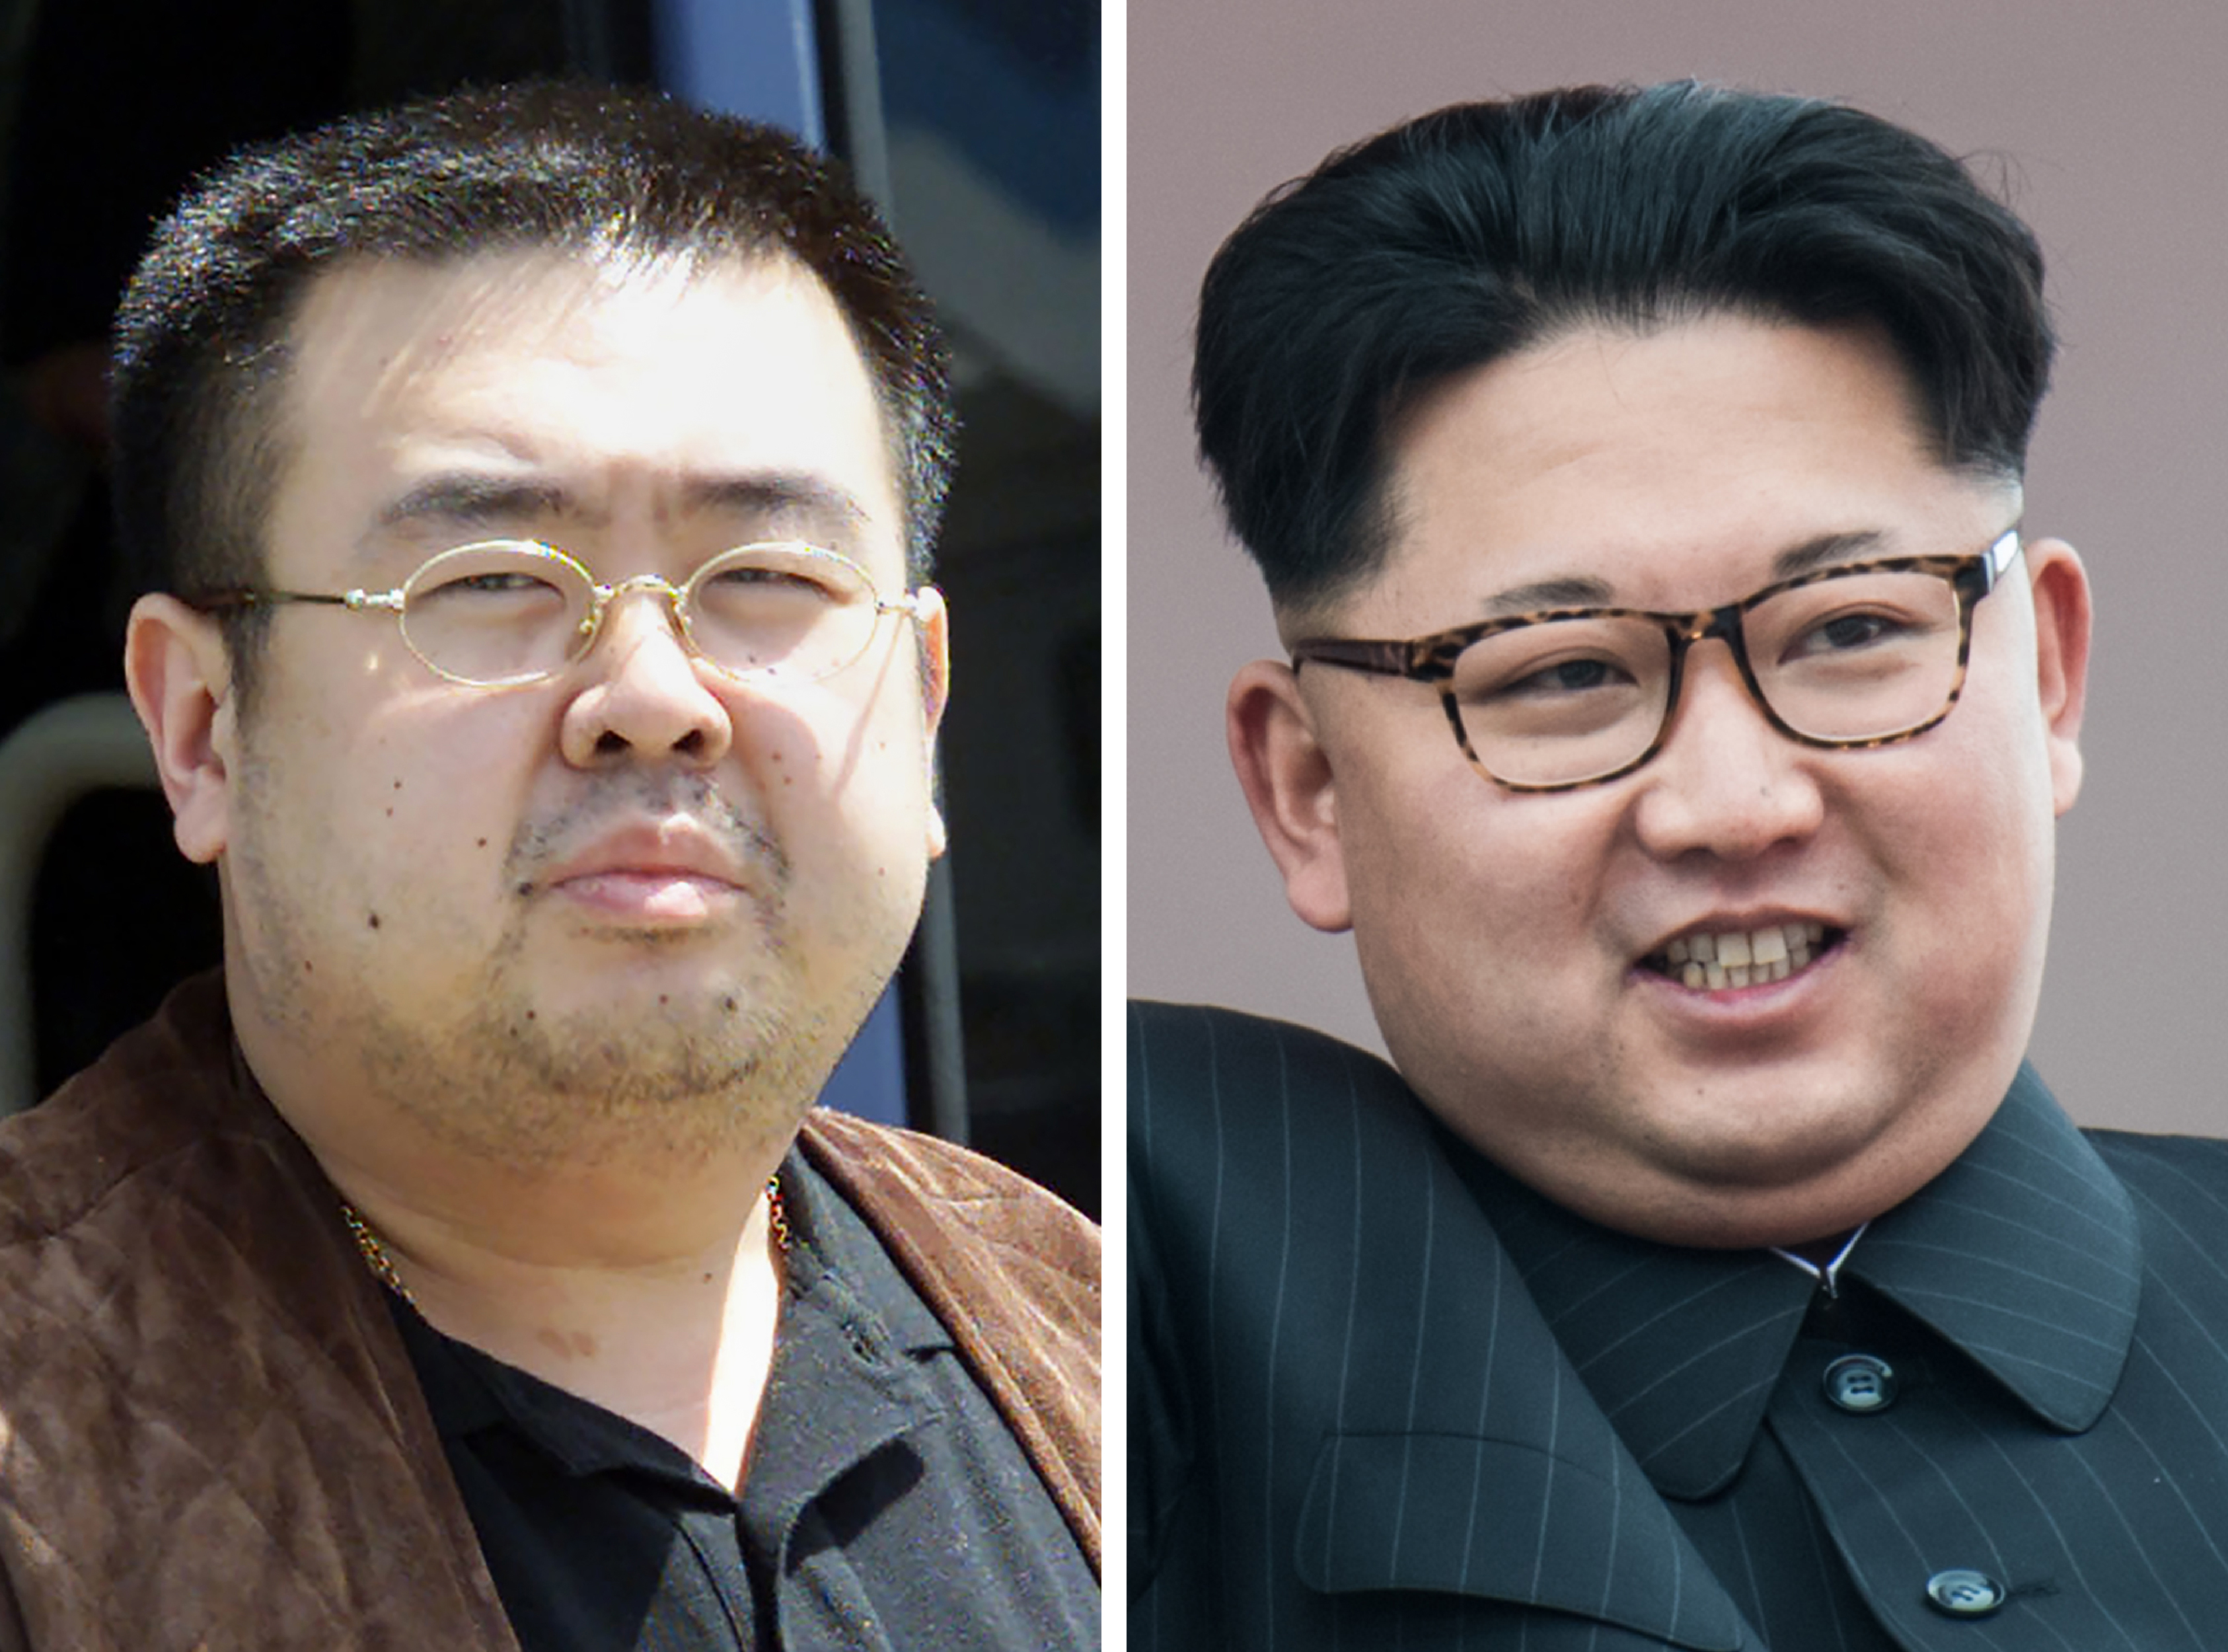 Kim Jong Nam is seen getting off a bus at Narita airport near Tokyo on May 4, 2001 and North Korean leader Kim Jong Un is seen during a parade in Pyongyang on May 10, 2016. (Toshifumi Kitamura—AFP/Getty Images)